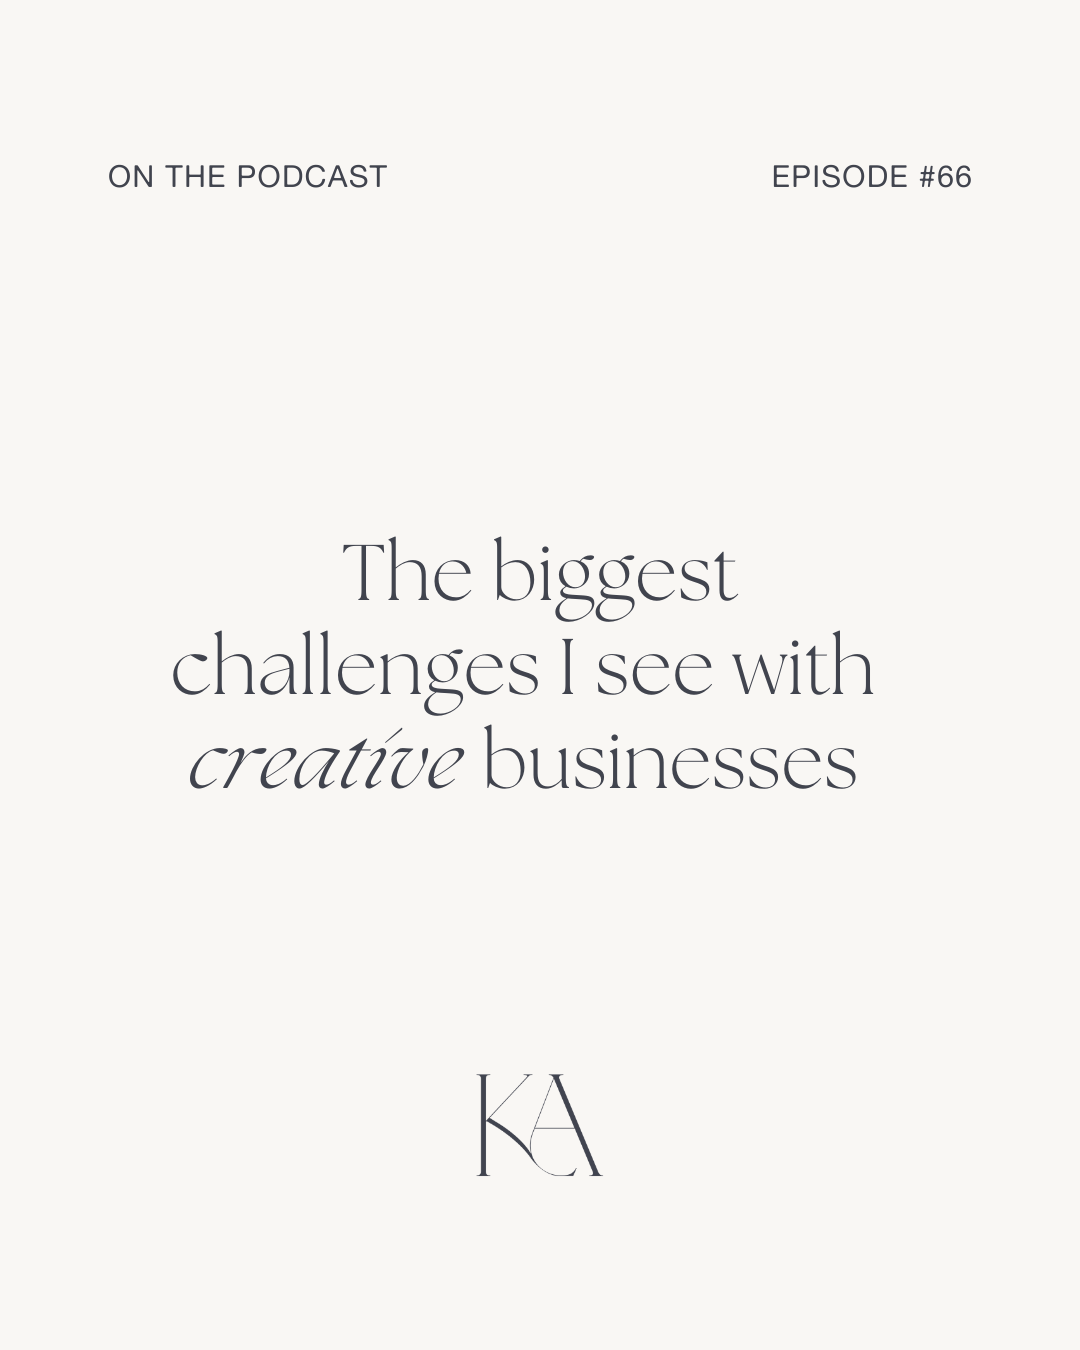 66. The biggest challenges I see with creative businesses